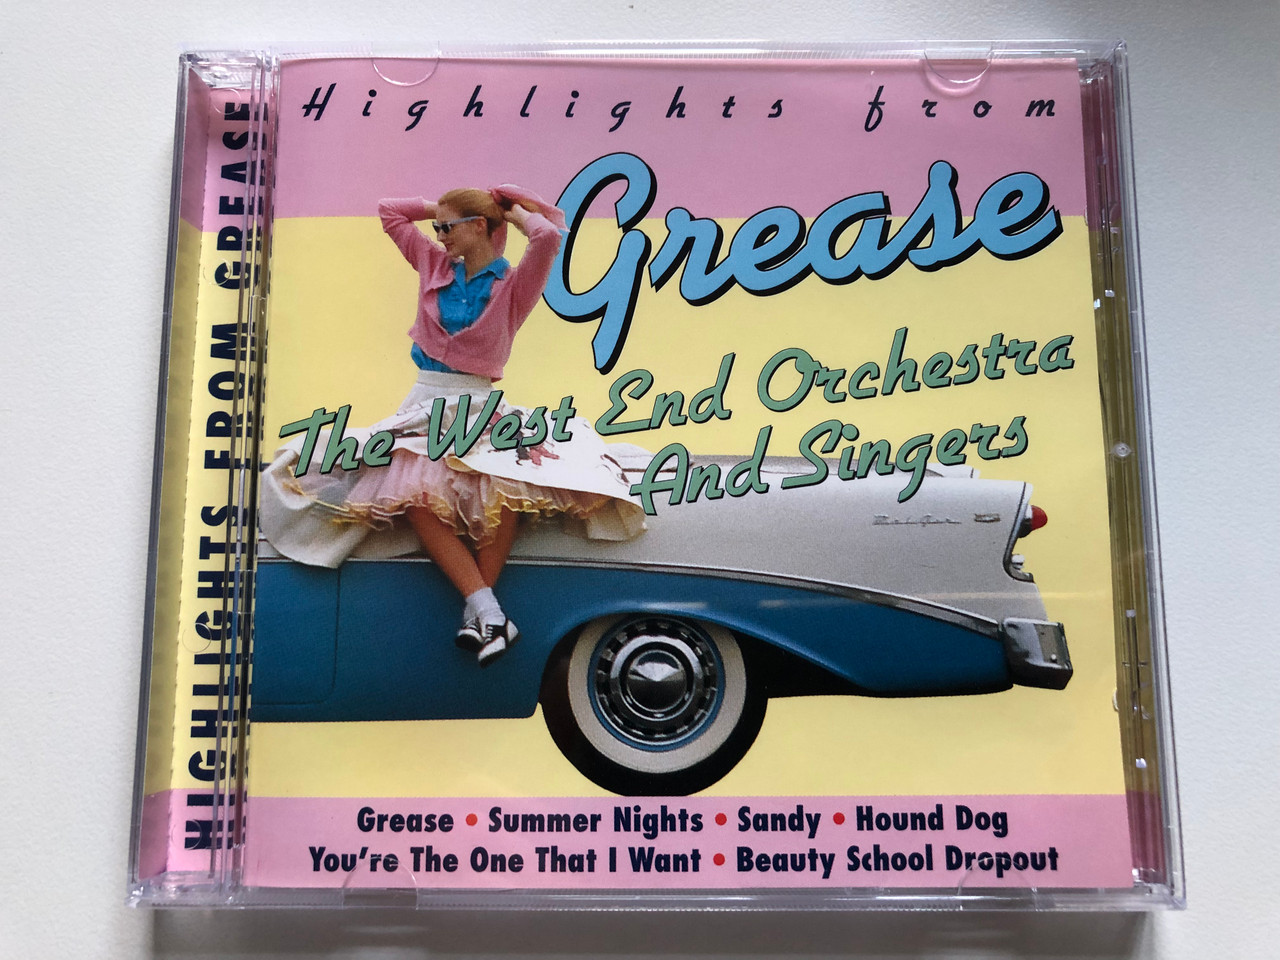 https://cdn10.bigcommerce.com/s-62bdpkt7pb/products/0/images/230779/Highlights_From_Grease_-_The_West_End_Orchestra_And_Singers_Grease_Summer_Nights_Sandy_Hound_Dog_Youre_The_One_That_I_Want_Beauty_School_Dropout_TRC_Music_Audio_CD_1998_97413E_1__25135.1654109956.1280.1280.JPG?c=2&_gl=1*1vus710*_ga*MjA2NTIxMjE2MC4xNTkwNTEyNTMy*_ga_WS2VZYPC6G*MTY1NDEwMjIxMy40MTguMS4xNjU0MTA5NzgwLjUx